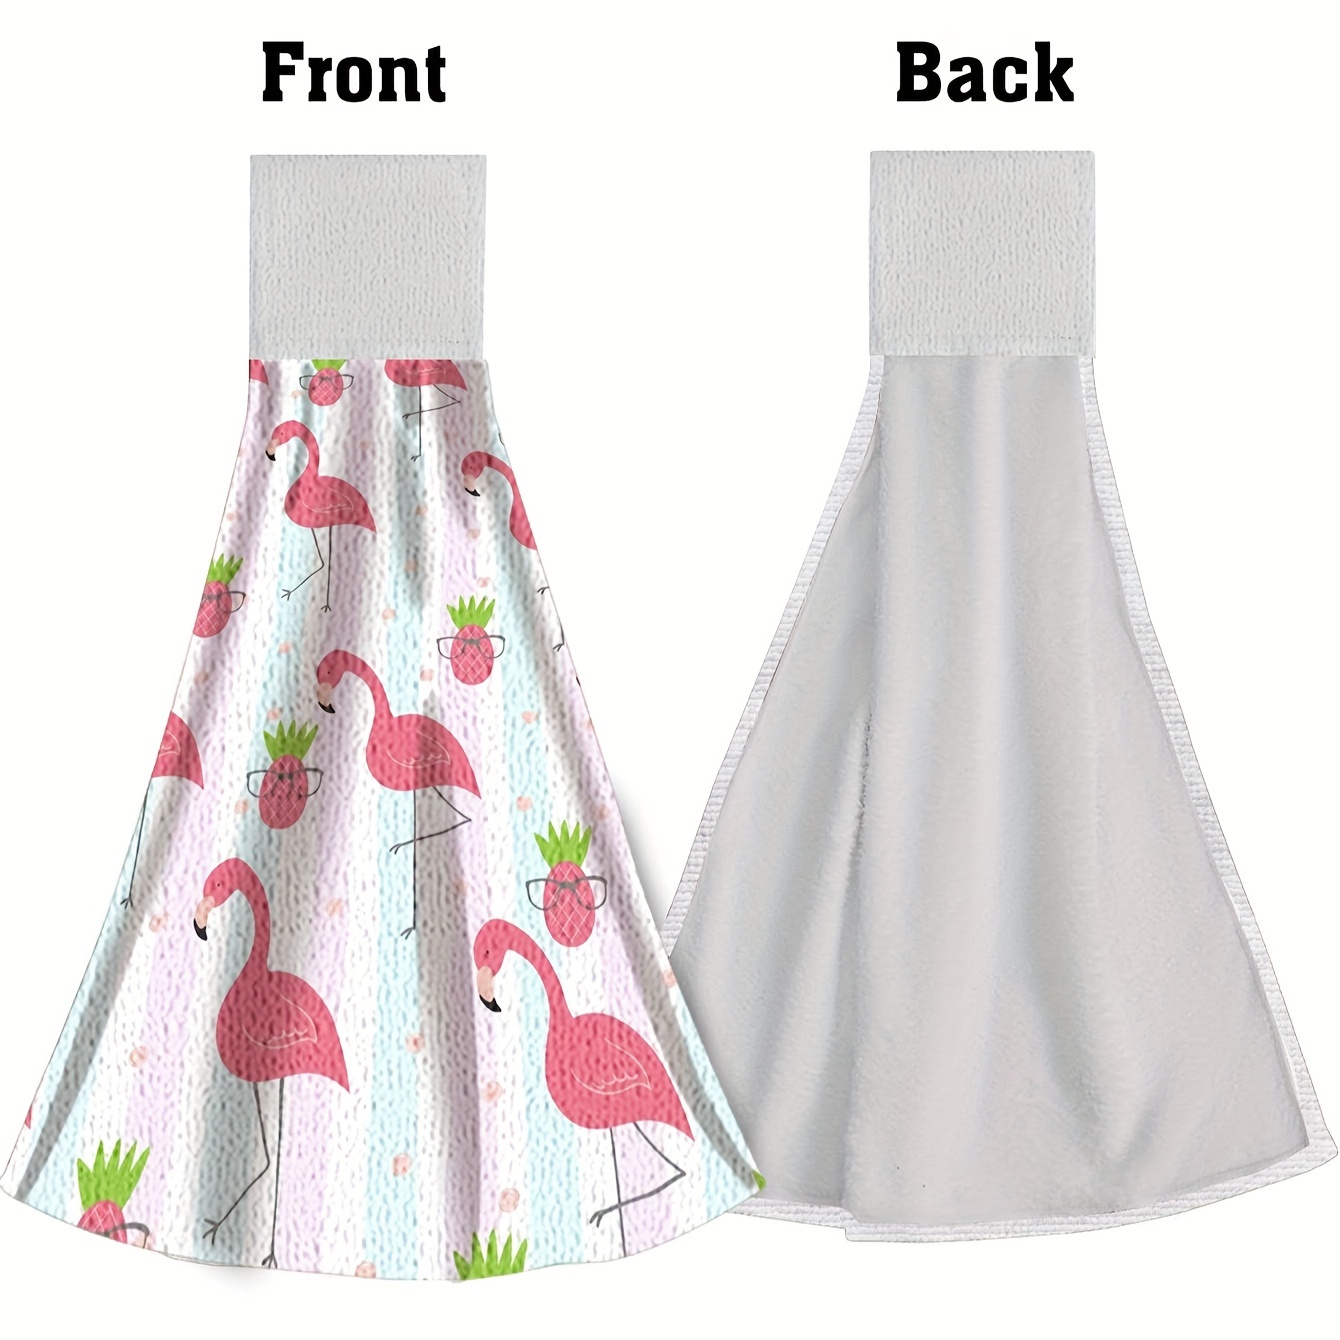 2pcs Kitchen Hand Towels,Hanging Towel For Wiping Hands,Highly